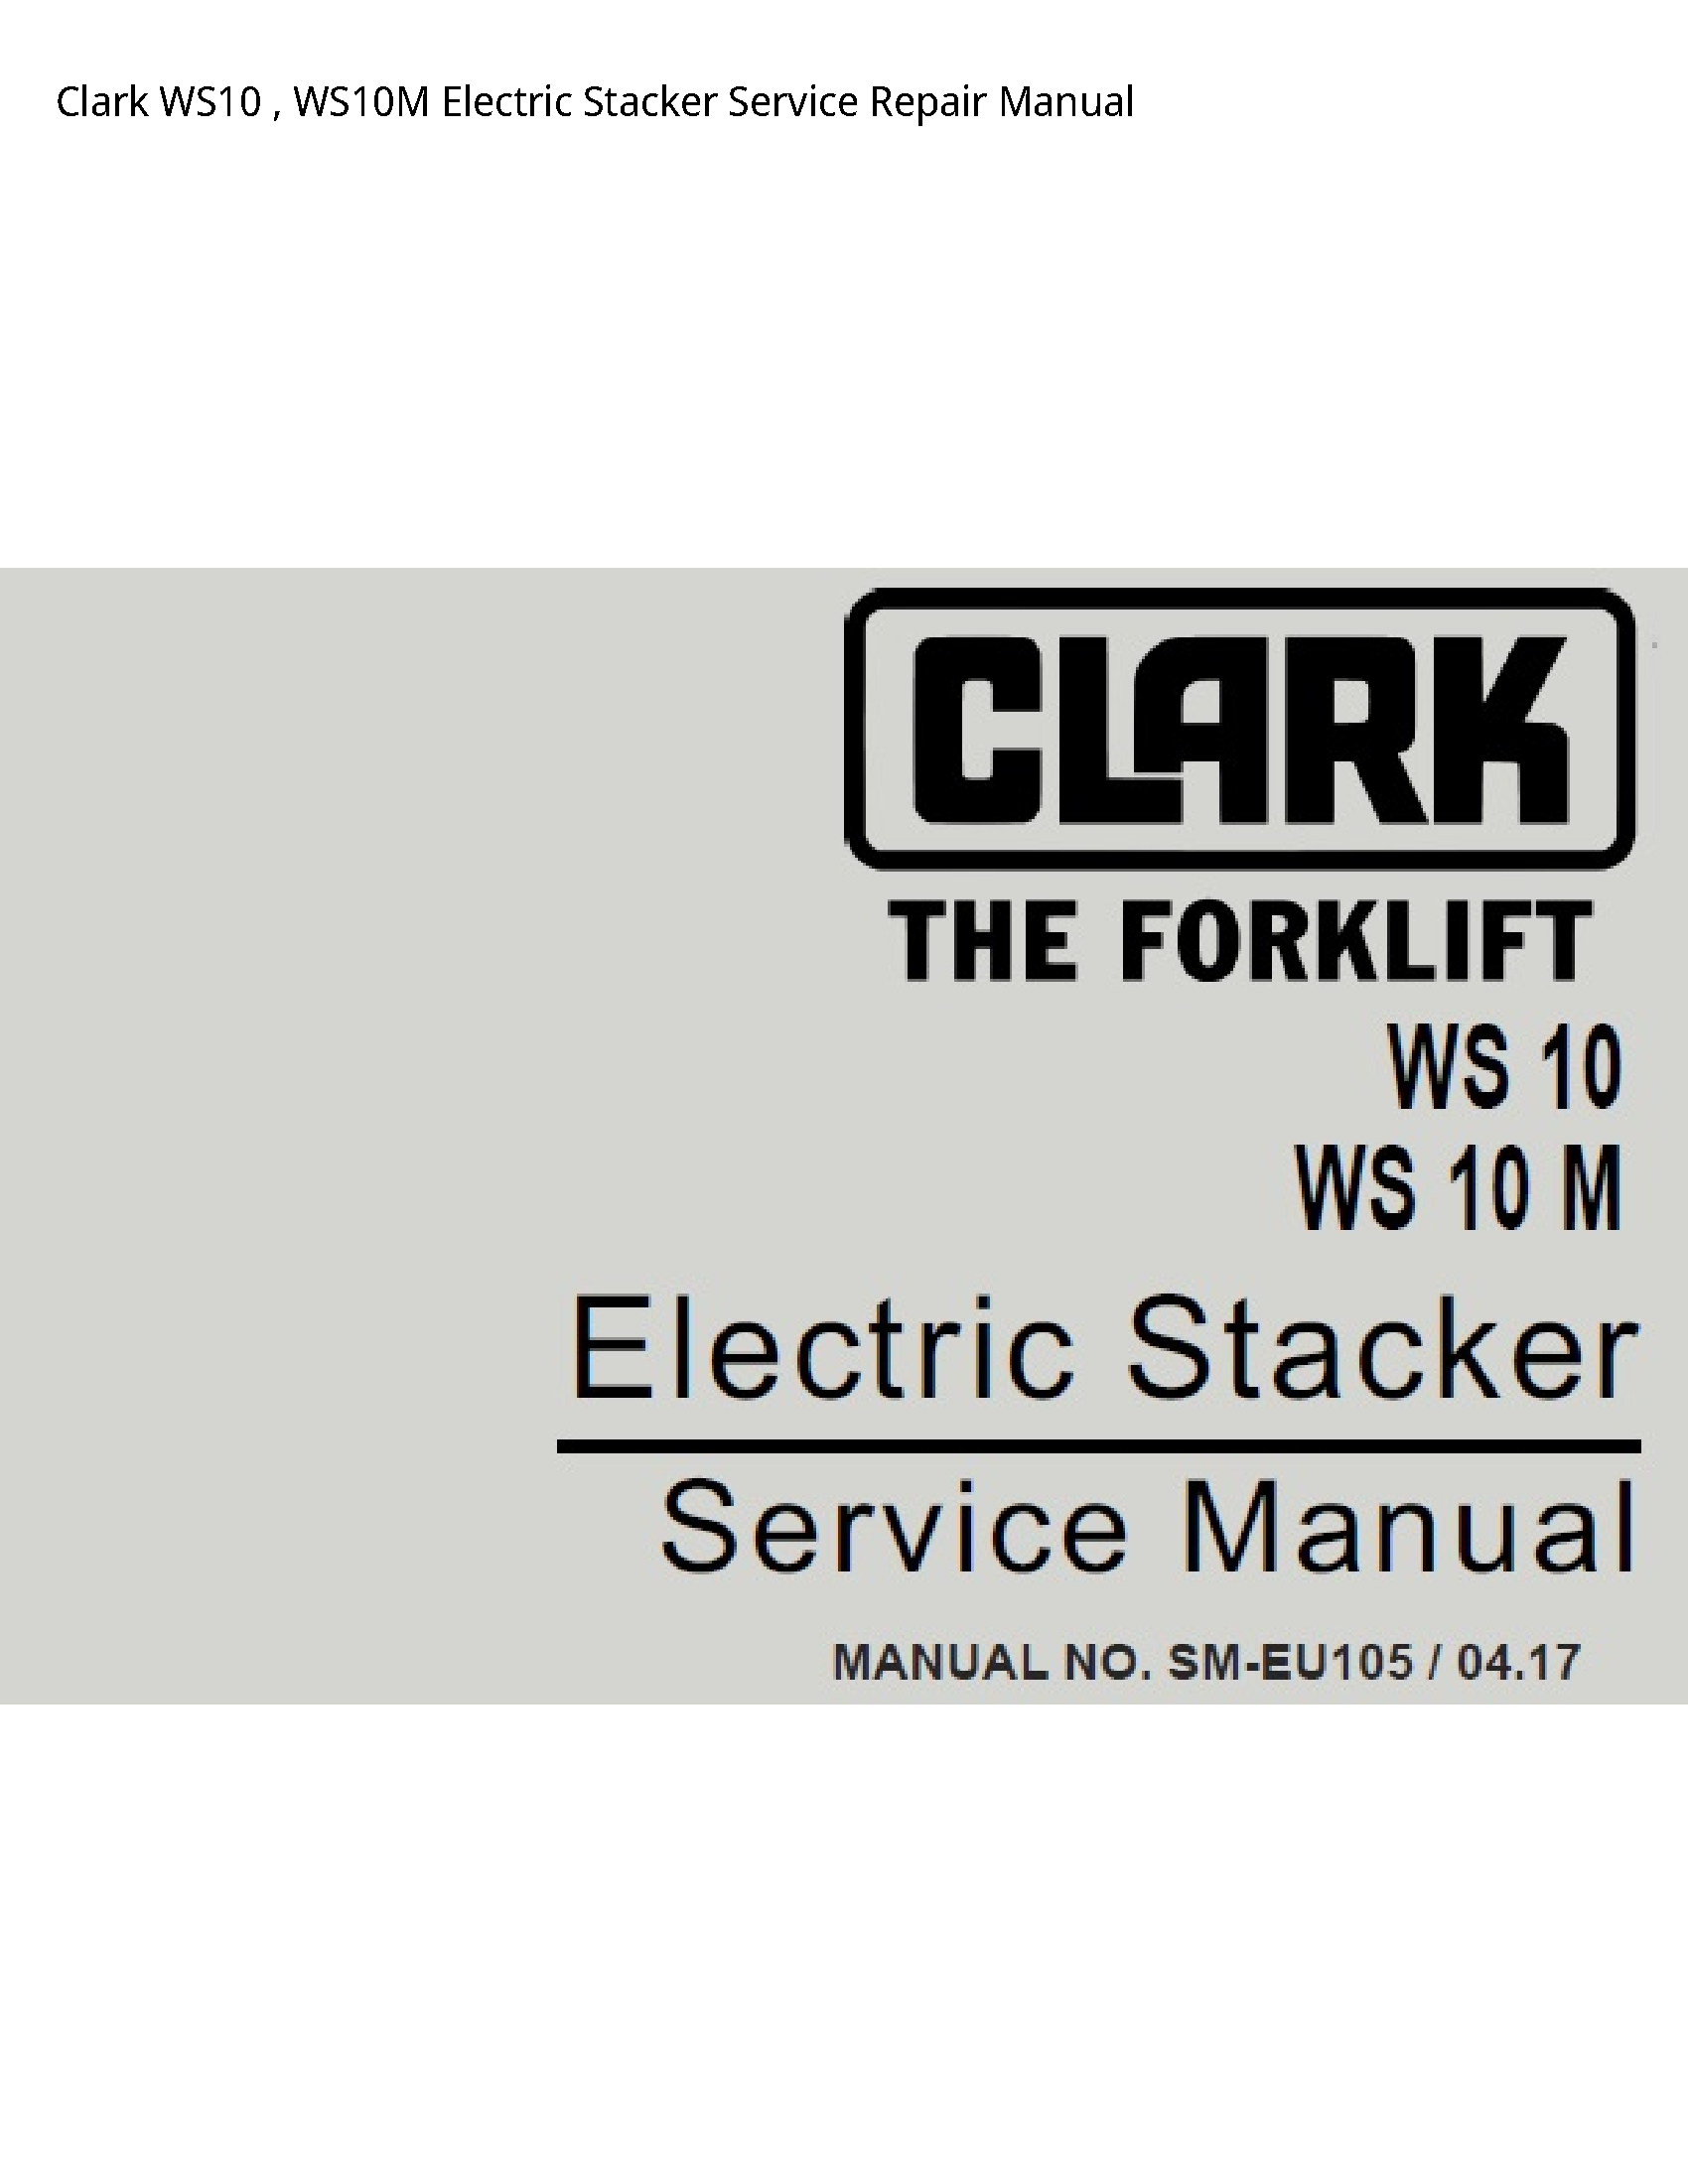 Clark WS10 Electric Stacker manual